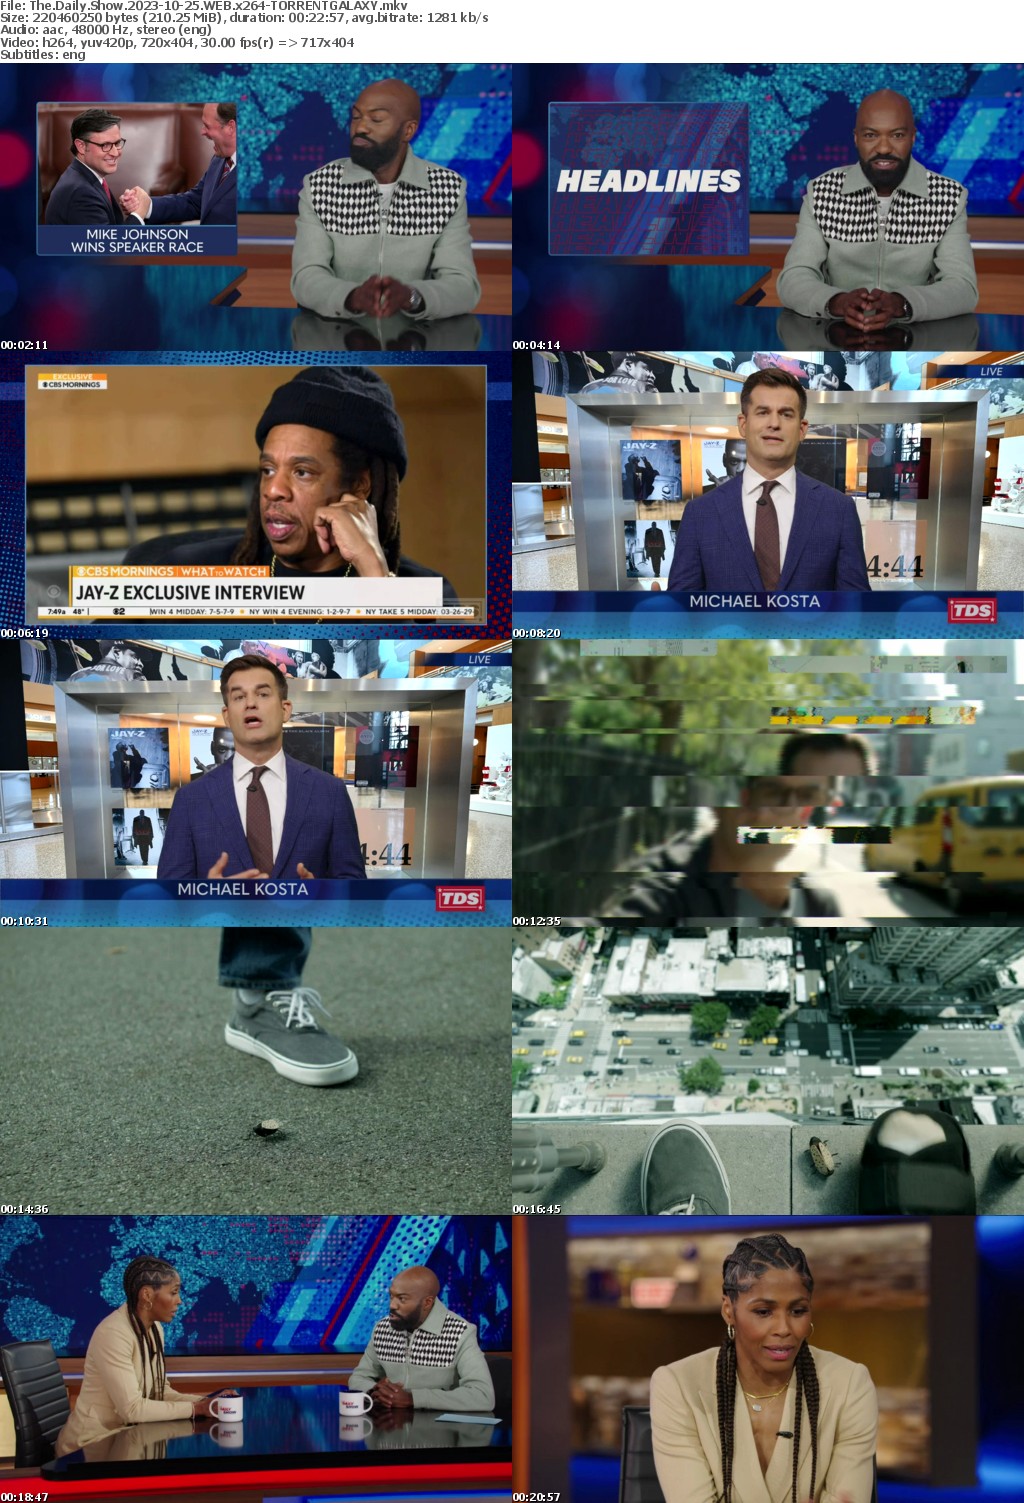 The Daily Show 2023-10-25 WEB x264-GALAXY